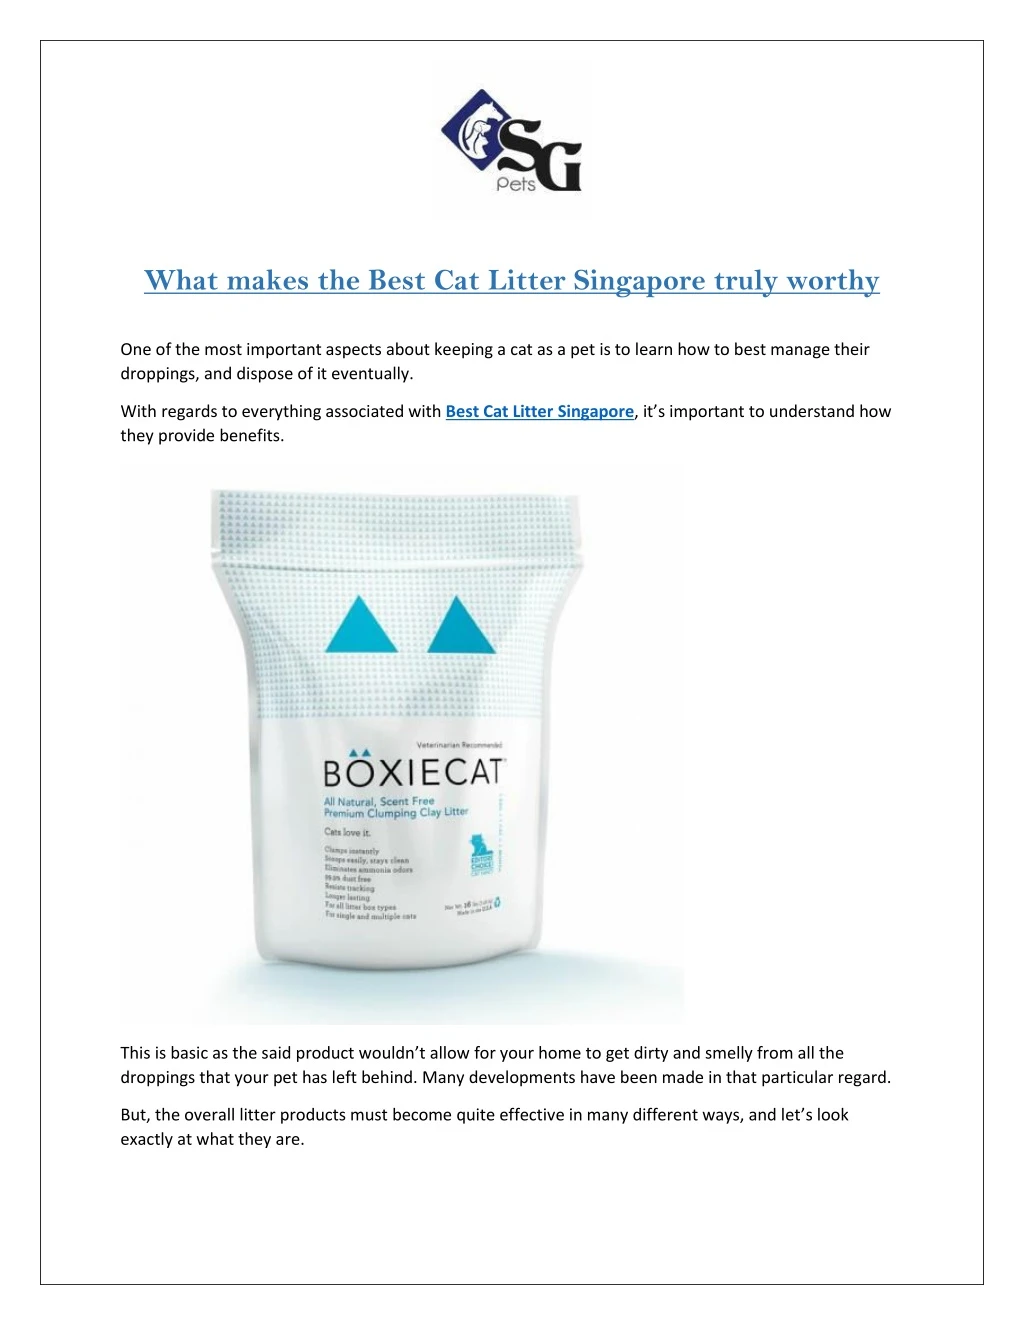 what makes the best cat litter singapore truly